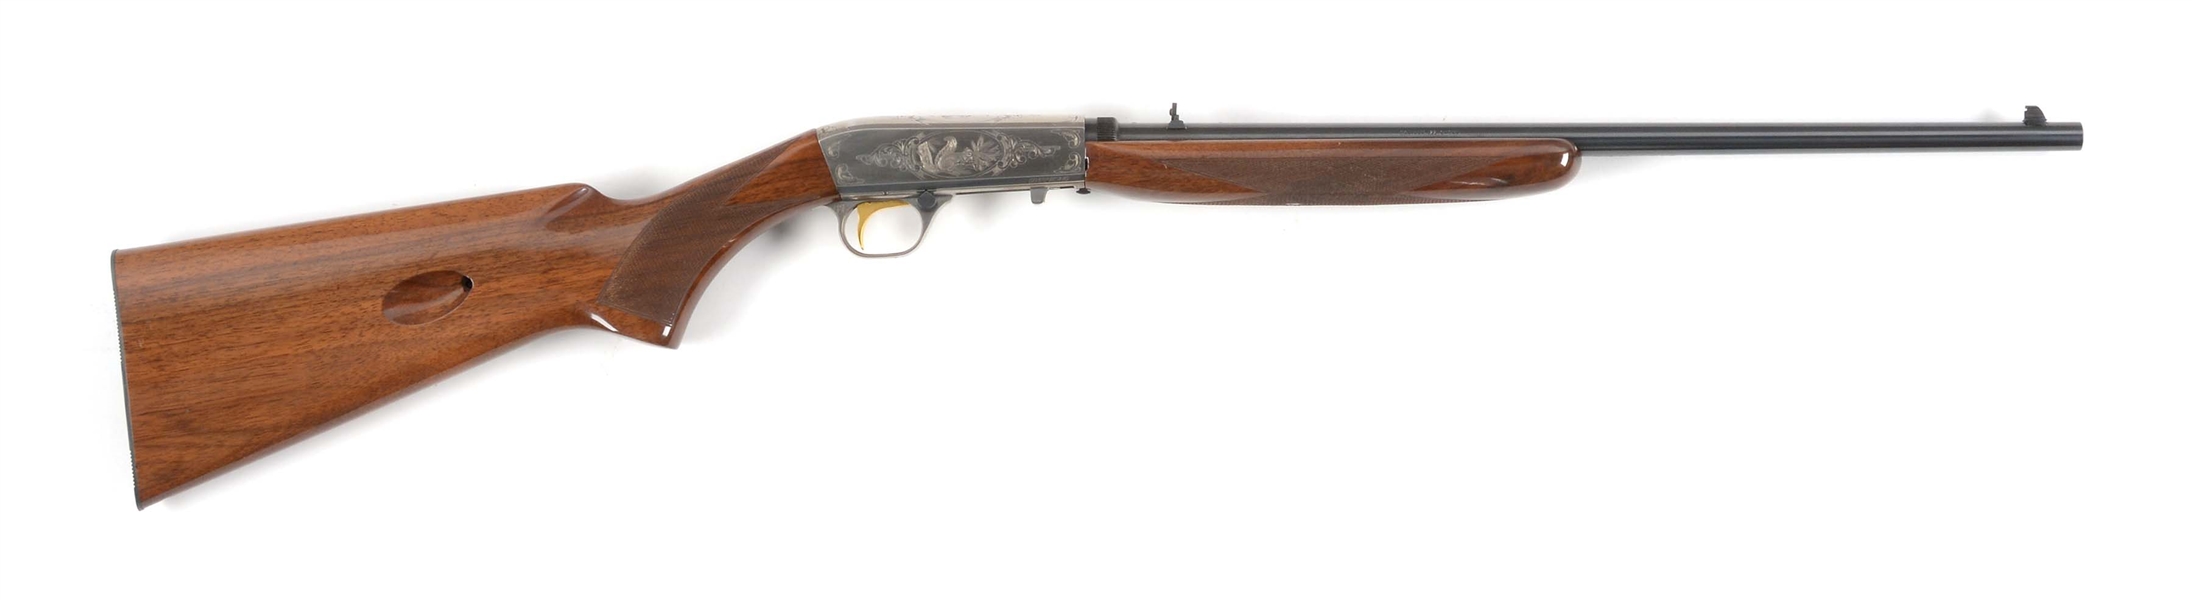 (N) ENGRAVED BELGIAN BROWNING SEMI-AUTOMATIC RIFLE.